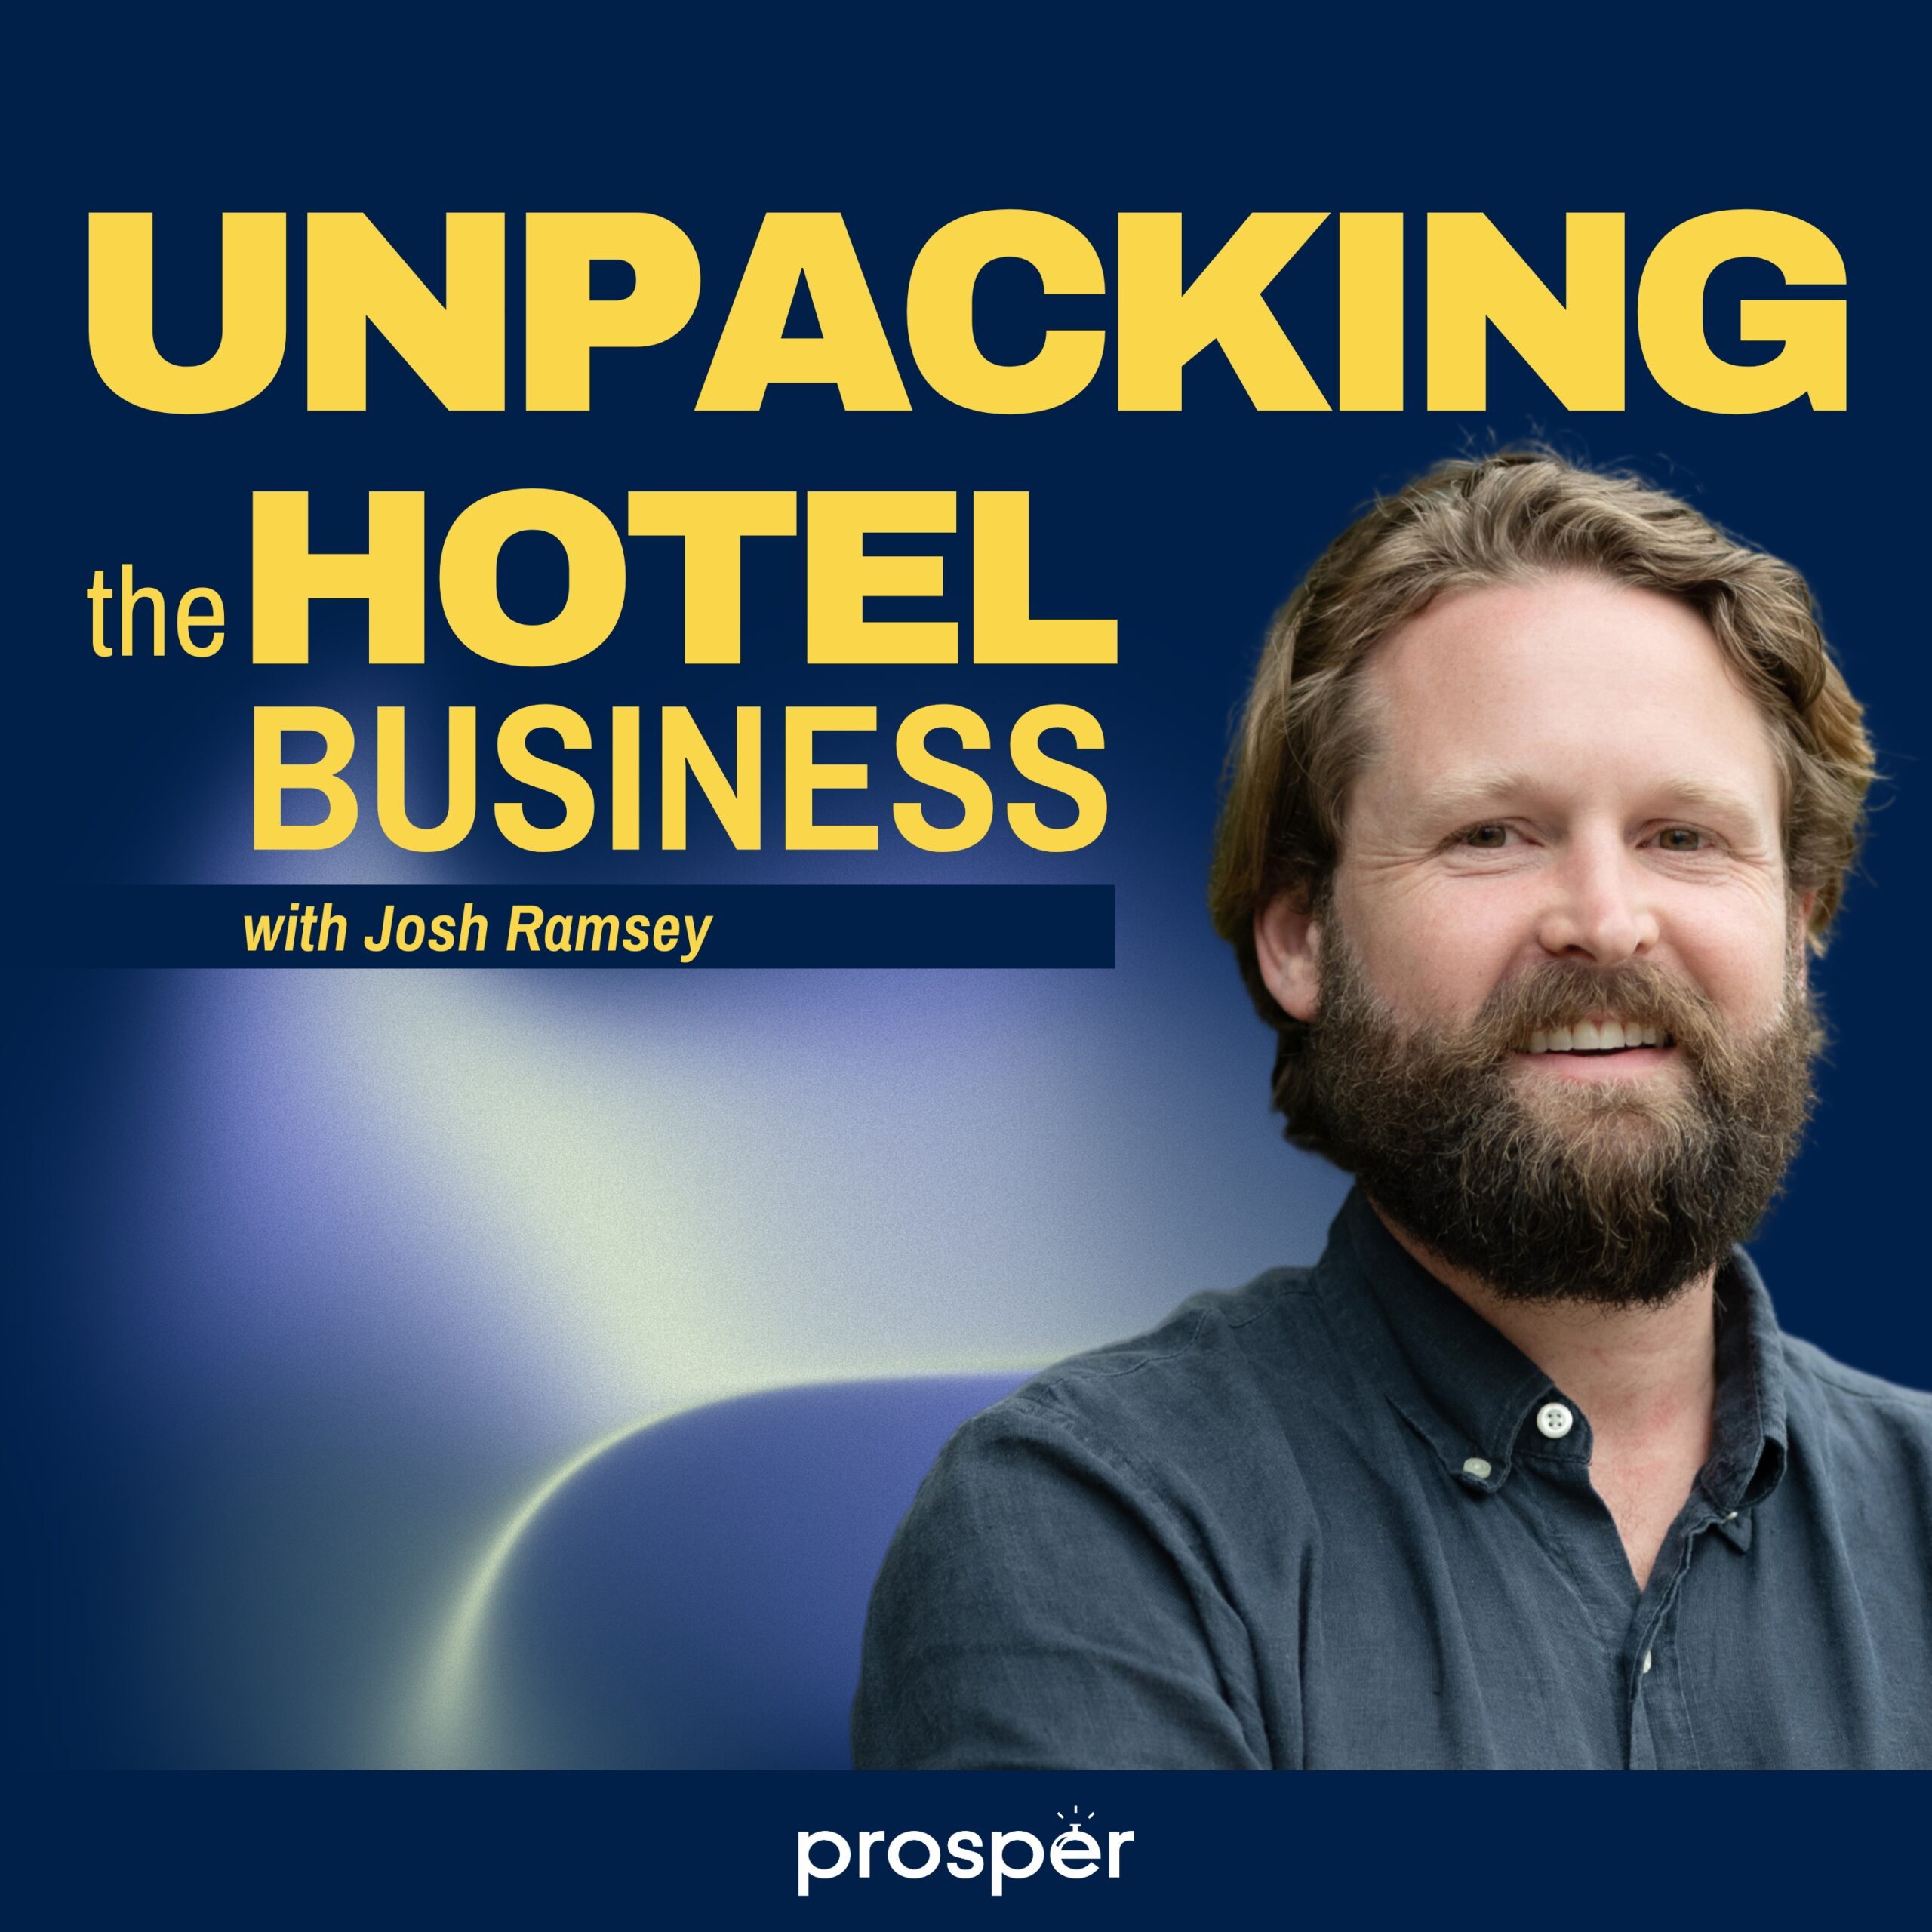 Unpacking the Hotel Business podcast